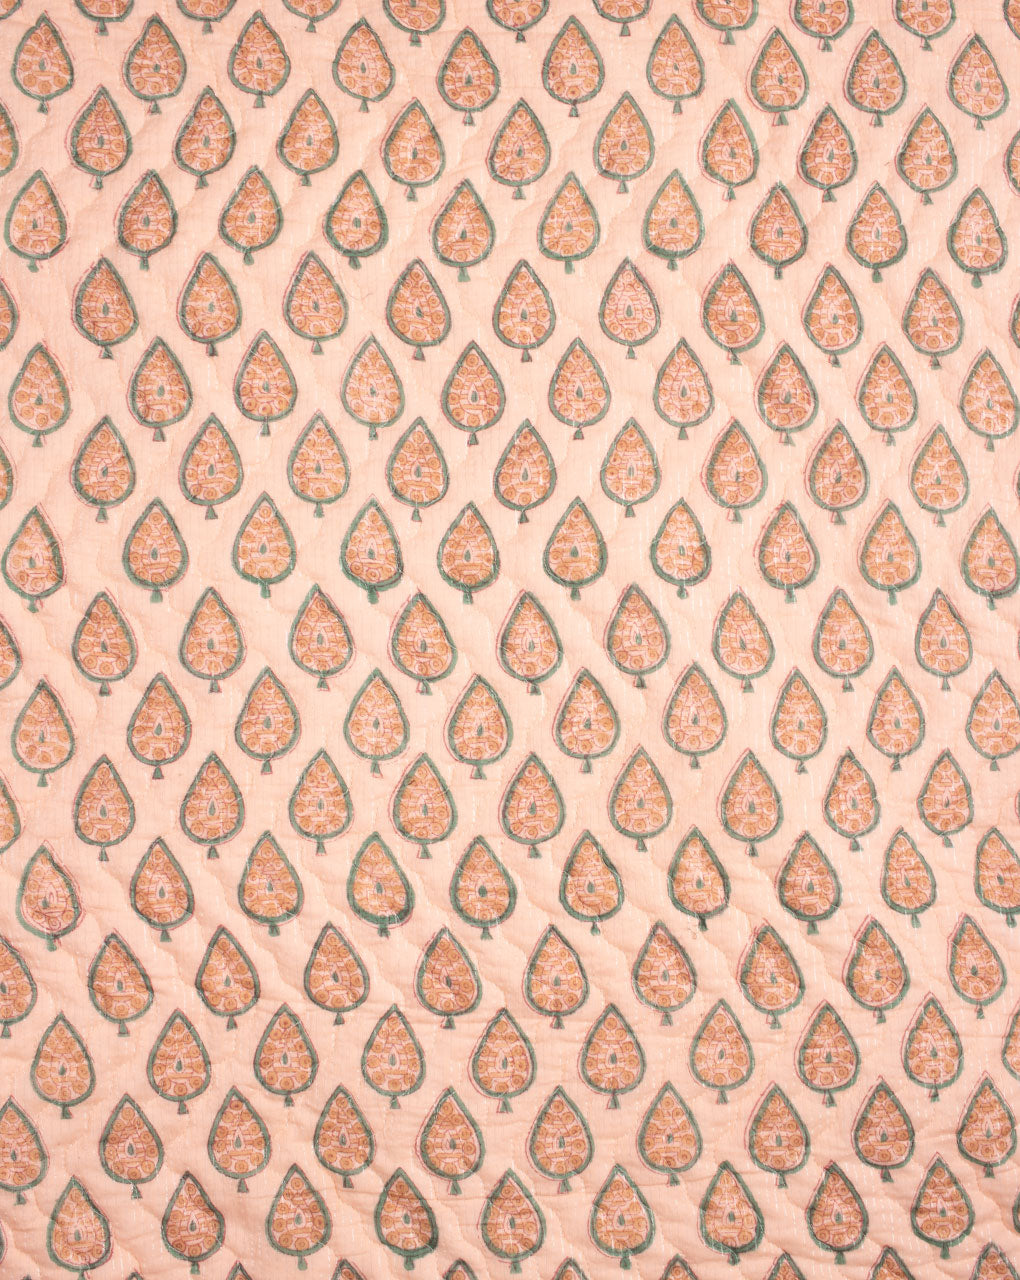 Booti Hand Block Lurex Cotton Quilted Fabric - Fabriclore.com